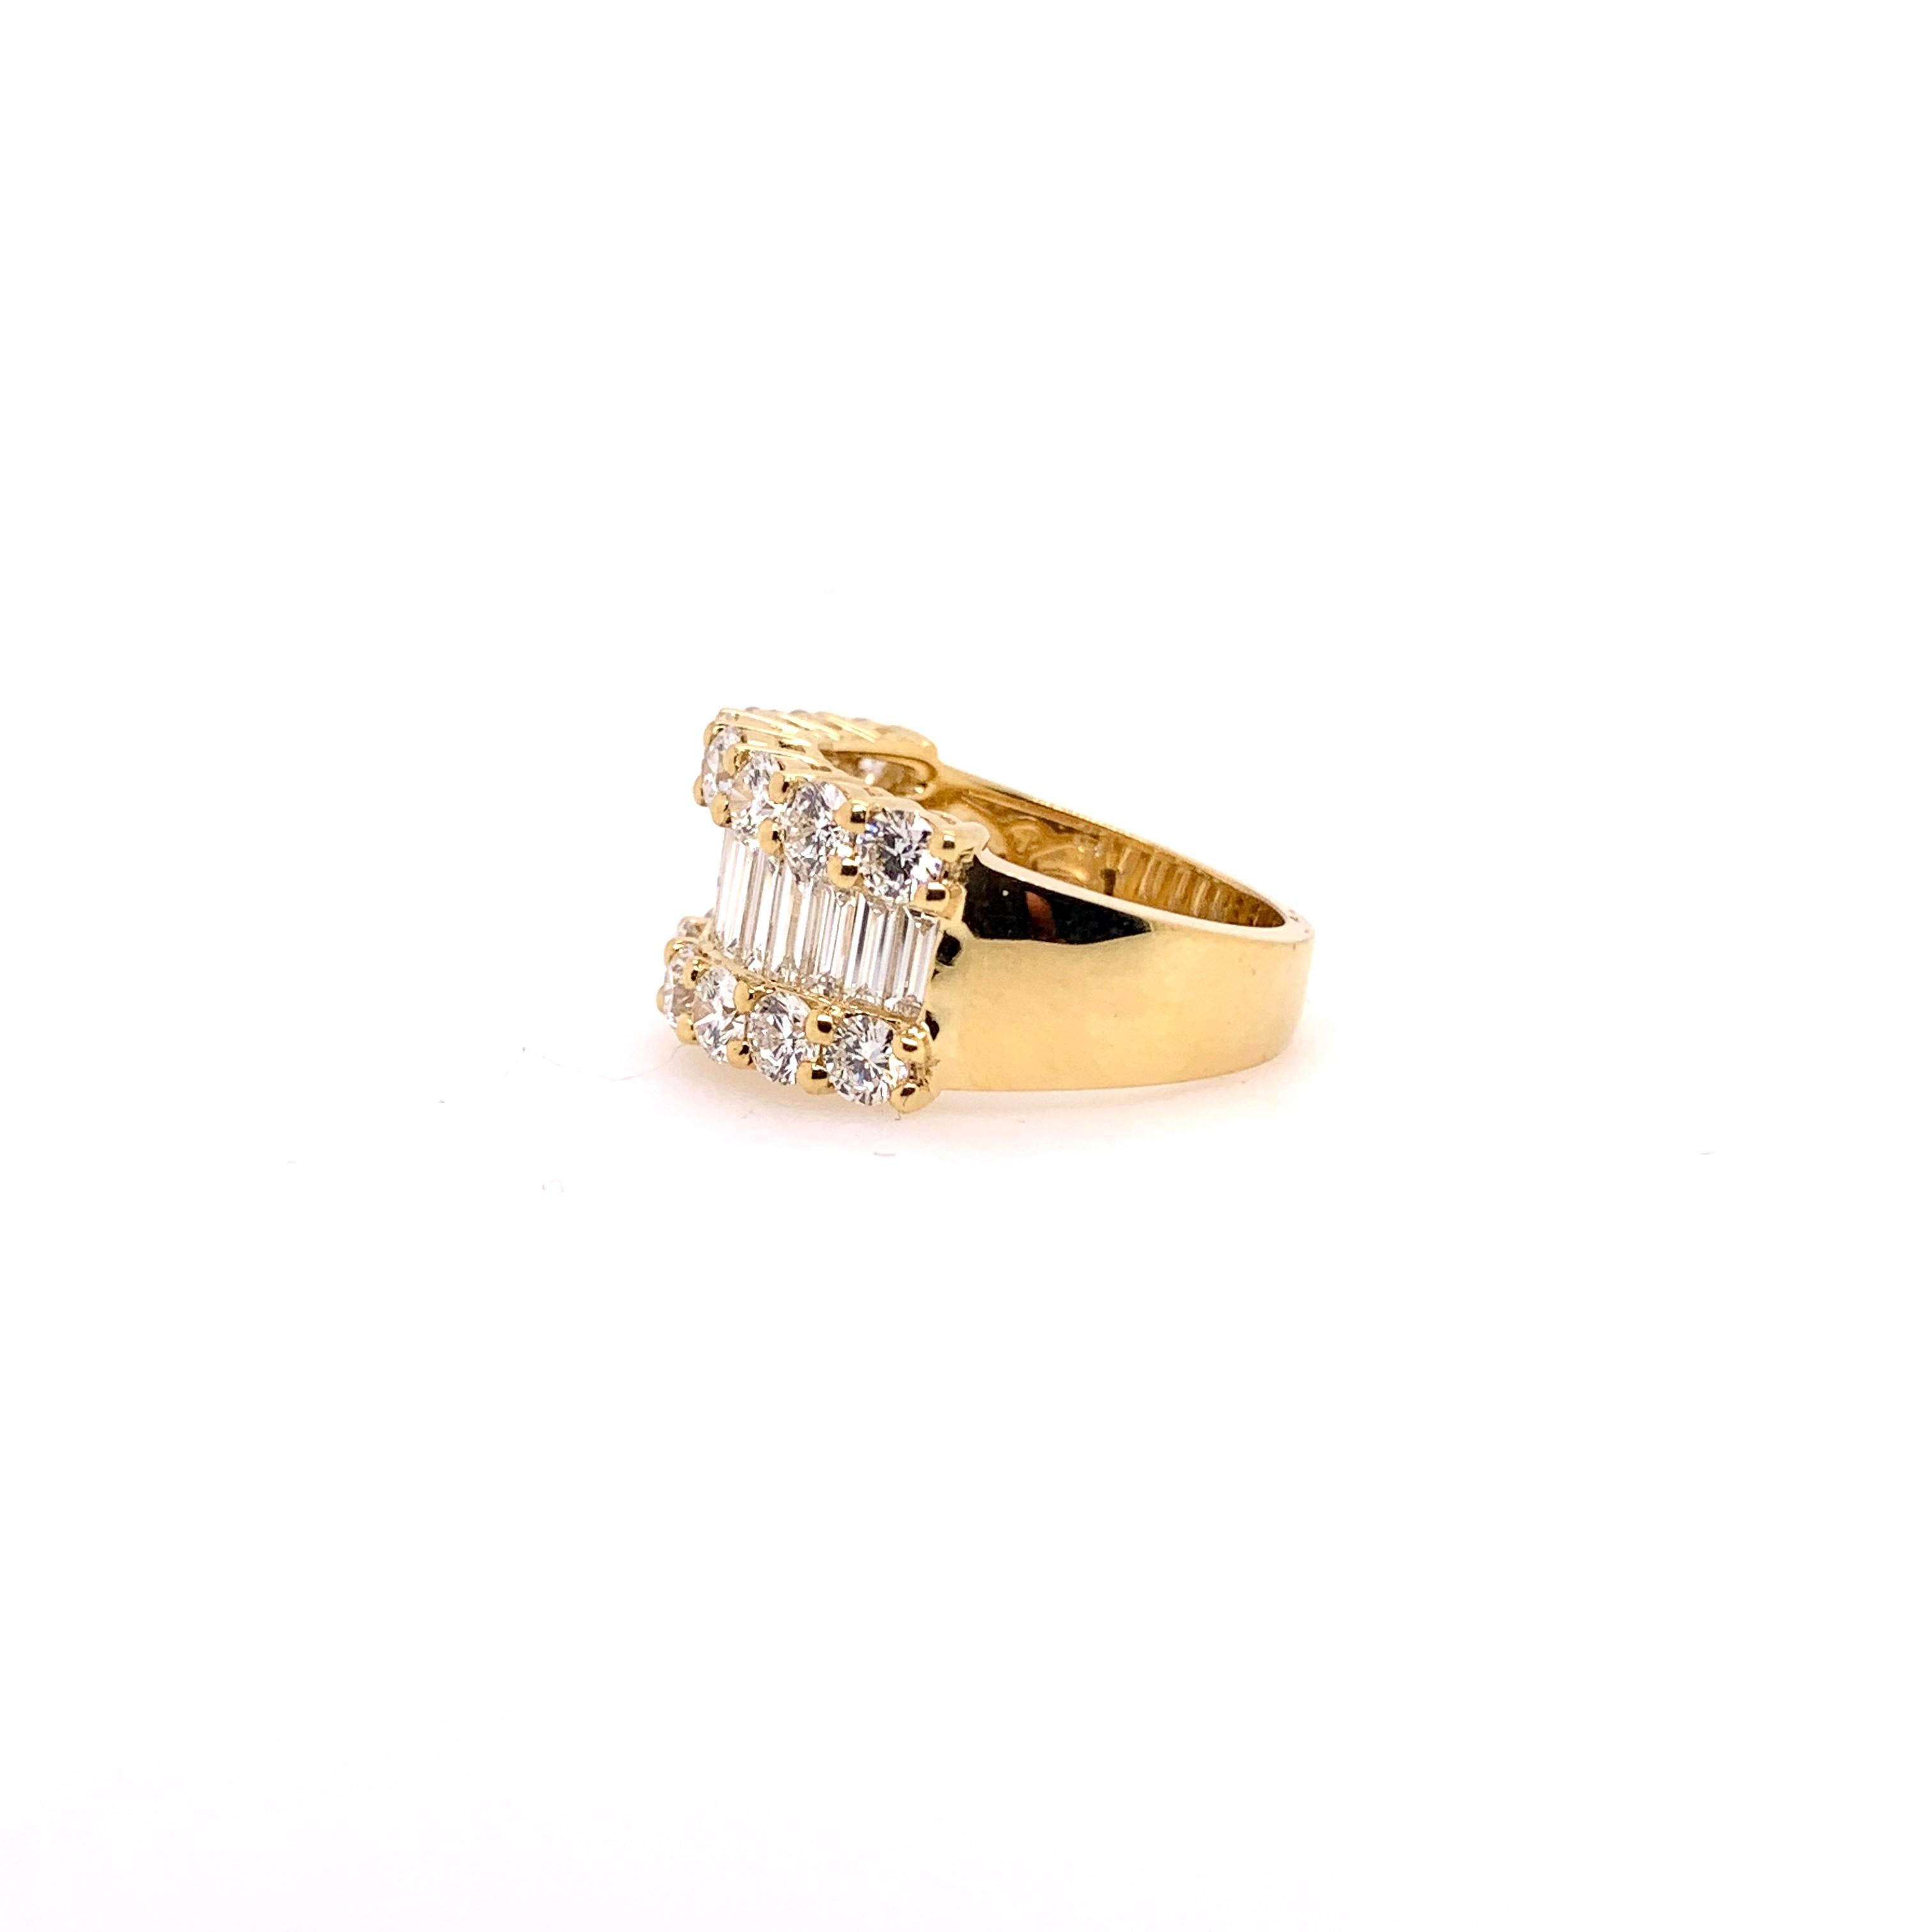 This iconic ring is a staple for any jewelry collection.  In 18k yellow gold, it has 3.46 cts. of large round diamonds and baguettes that perfects the combination of form and function. 


Ring Size : 6.5 ( can be resize)
Diamonds: 3.46
Metal: 18k